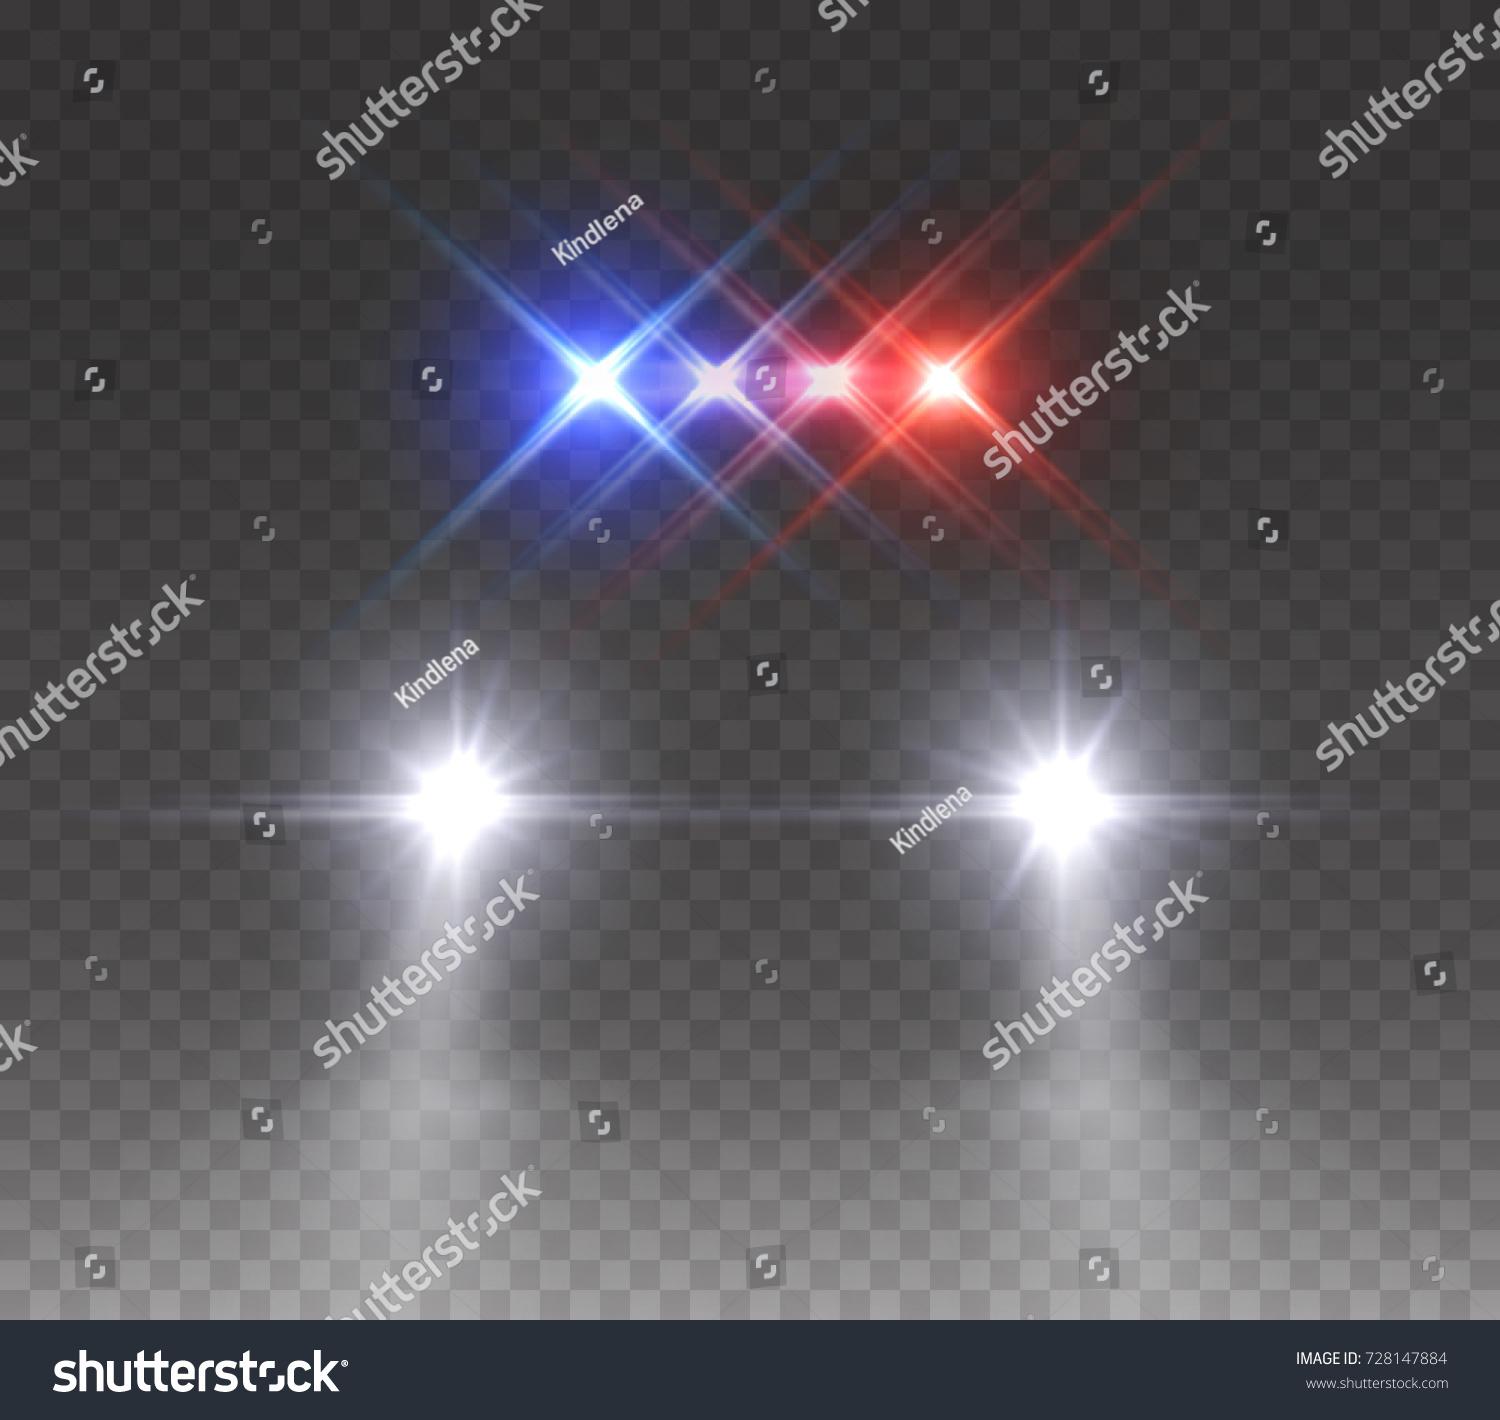 SVG of Police headlights flares and siren effect front view. Realistic emergency car lights isolated on transparent background. Vector special red blue bar beams at night  svg